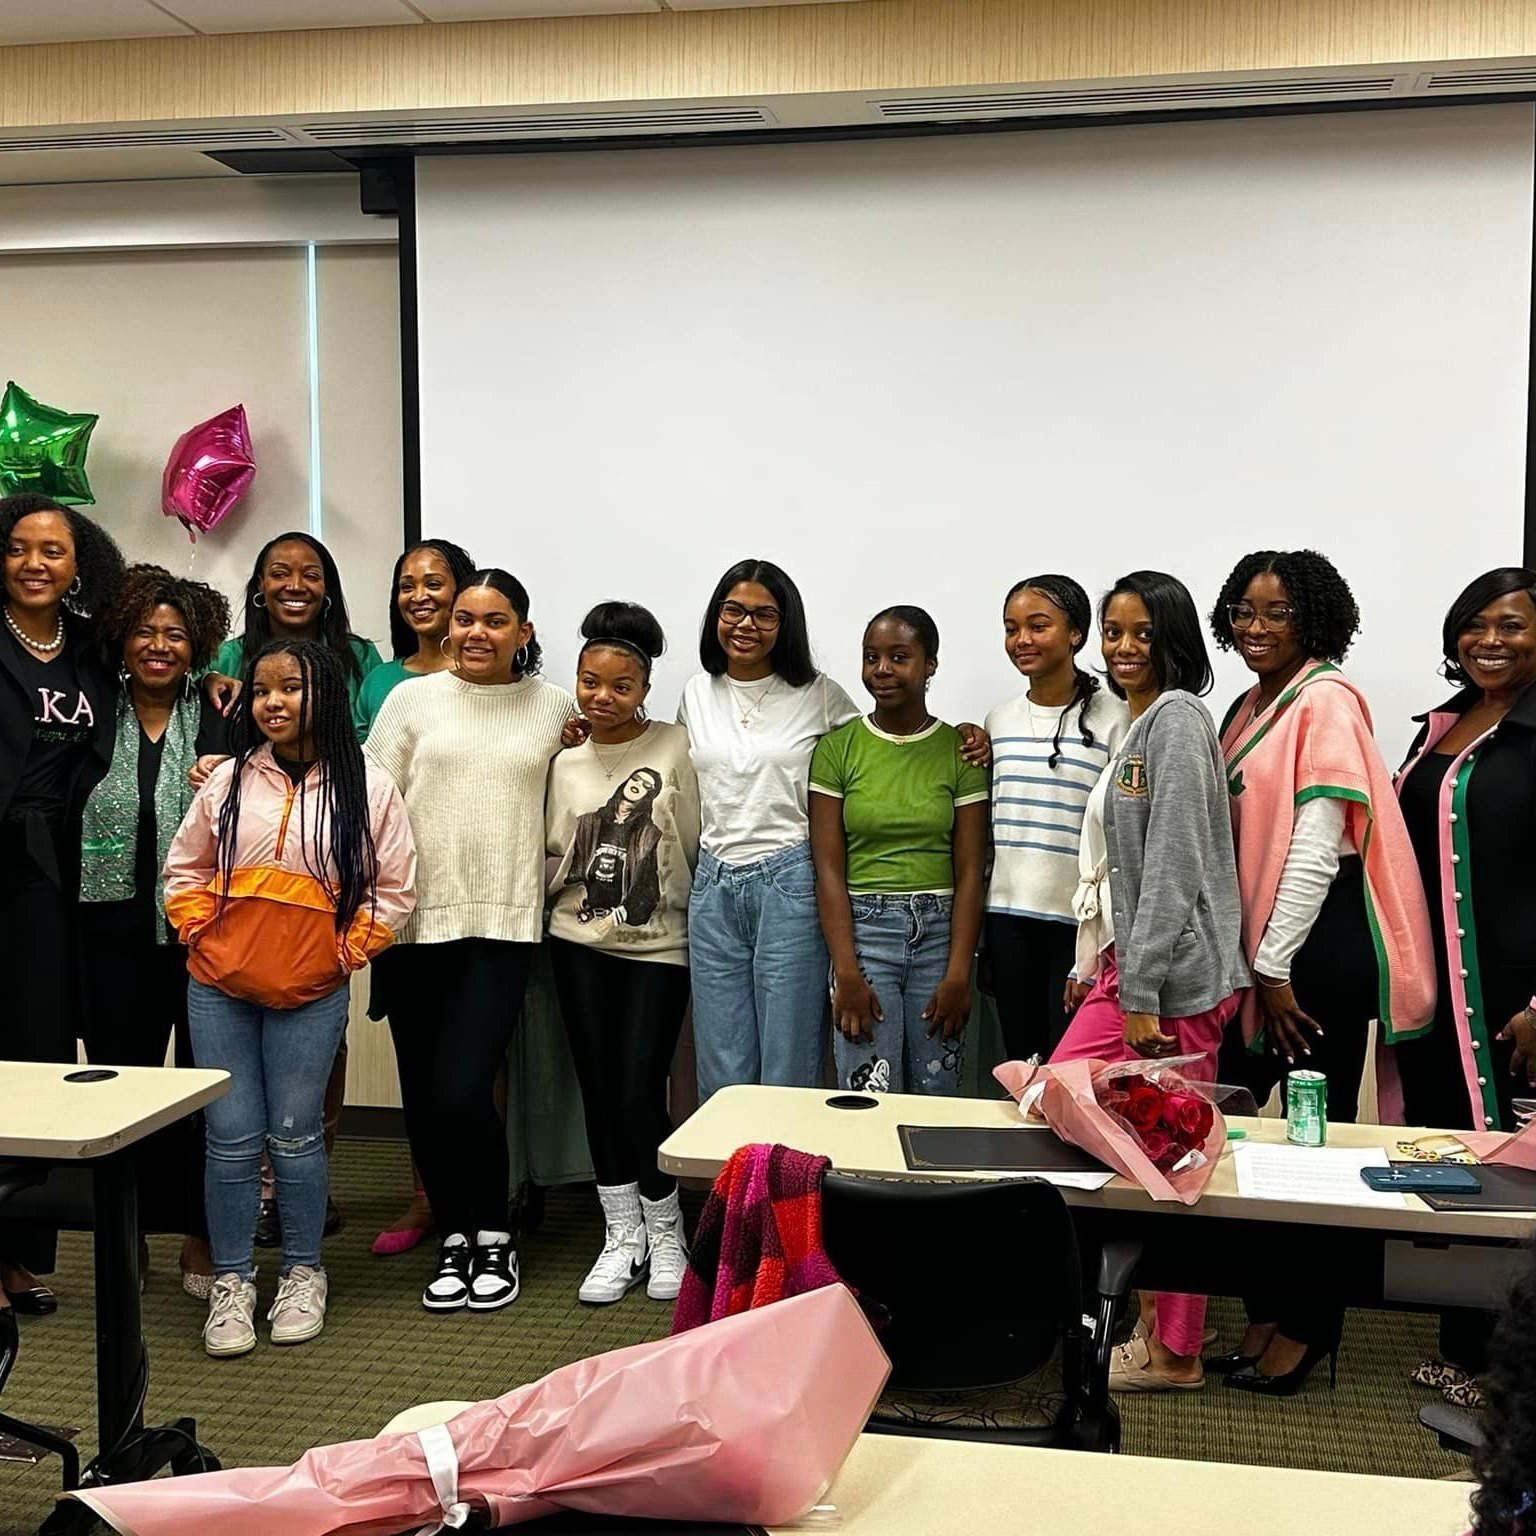 We are so proud of our YLI Scholars! On Saturday April 27th, Alpha Kappa Alpha Sorority, Inc.&reg; Upsilon Epsilon Omega Chapter and Ladies of Vision Charities, Inc. celebrated the Cohort 2's completion of our Youth Leadership Institute (YLI). It was